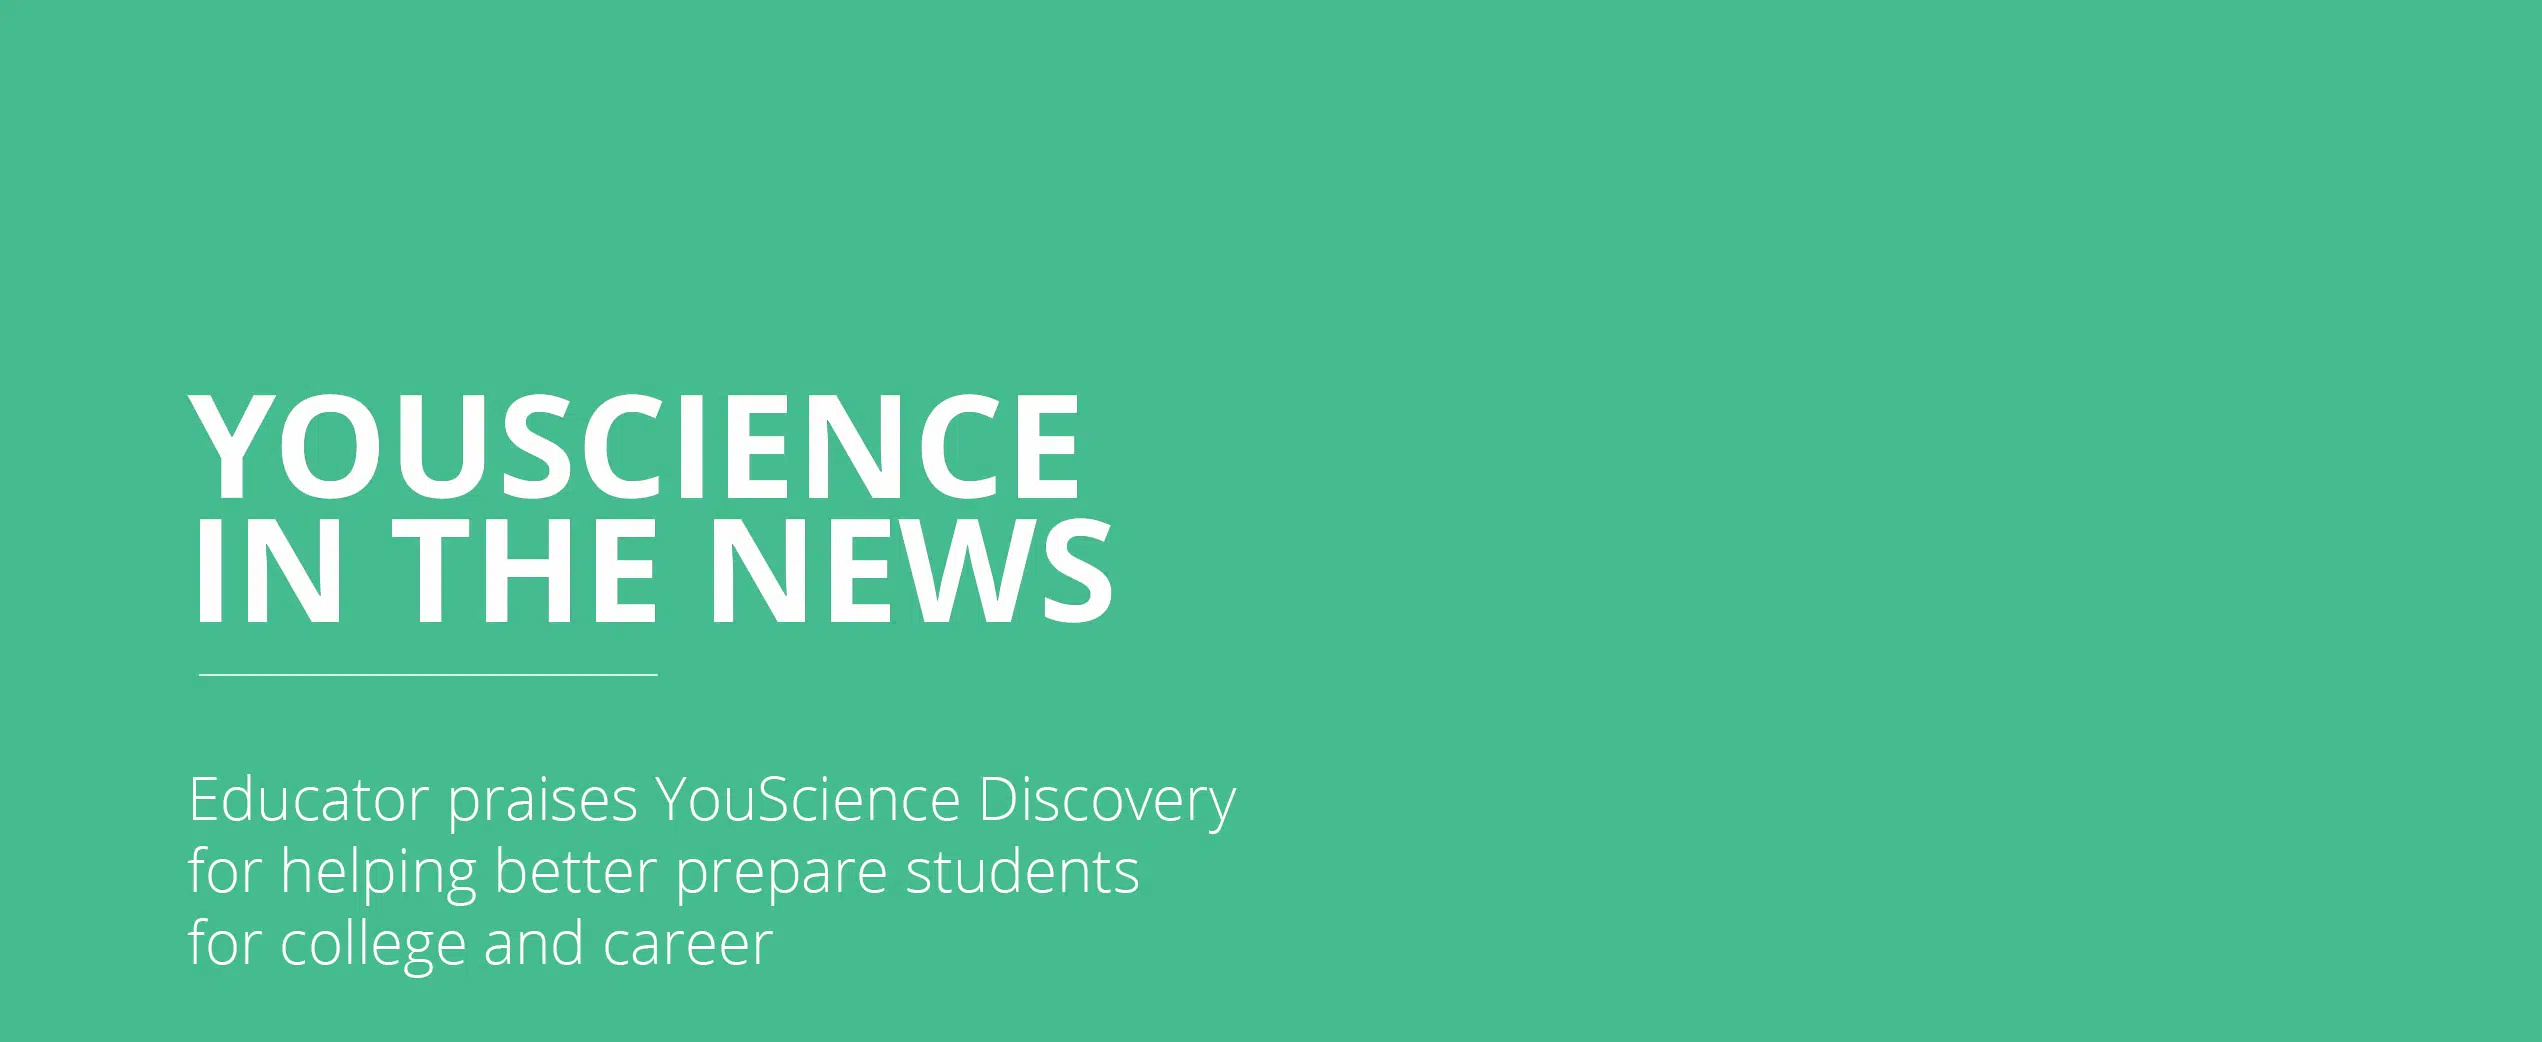 Educator praises YouScience Discovery for helping better prepare students for college and career